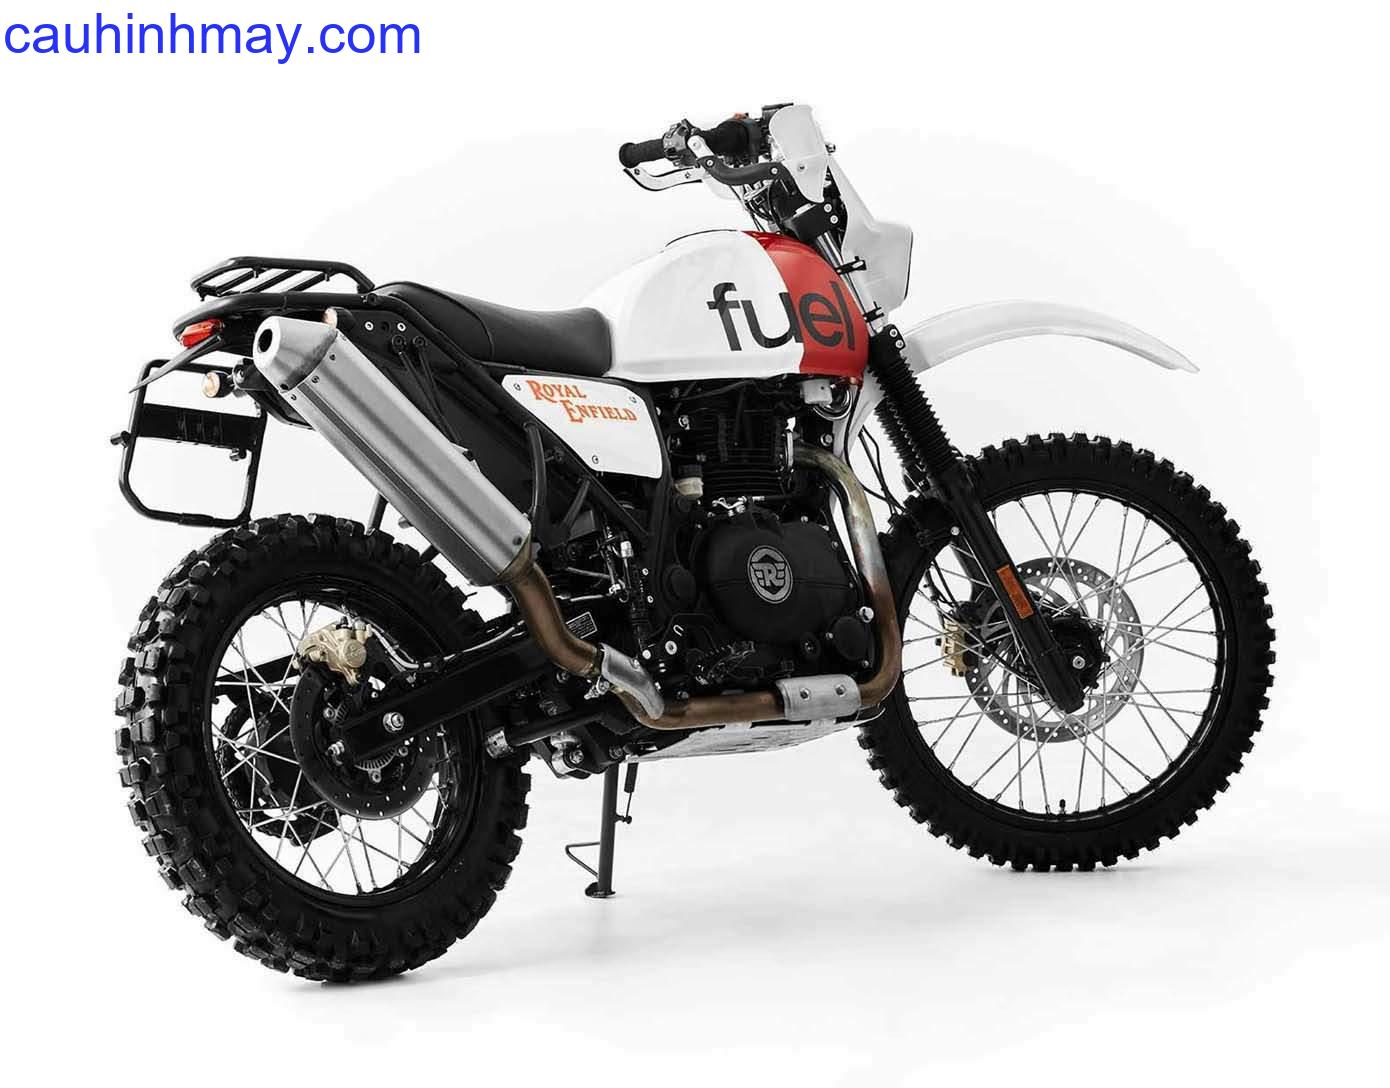 ROYAL RALLY 400 BY FUEL MOTORCYCLES - cauhinhmay.com